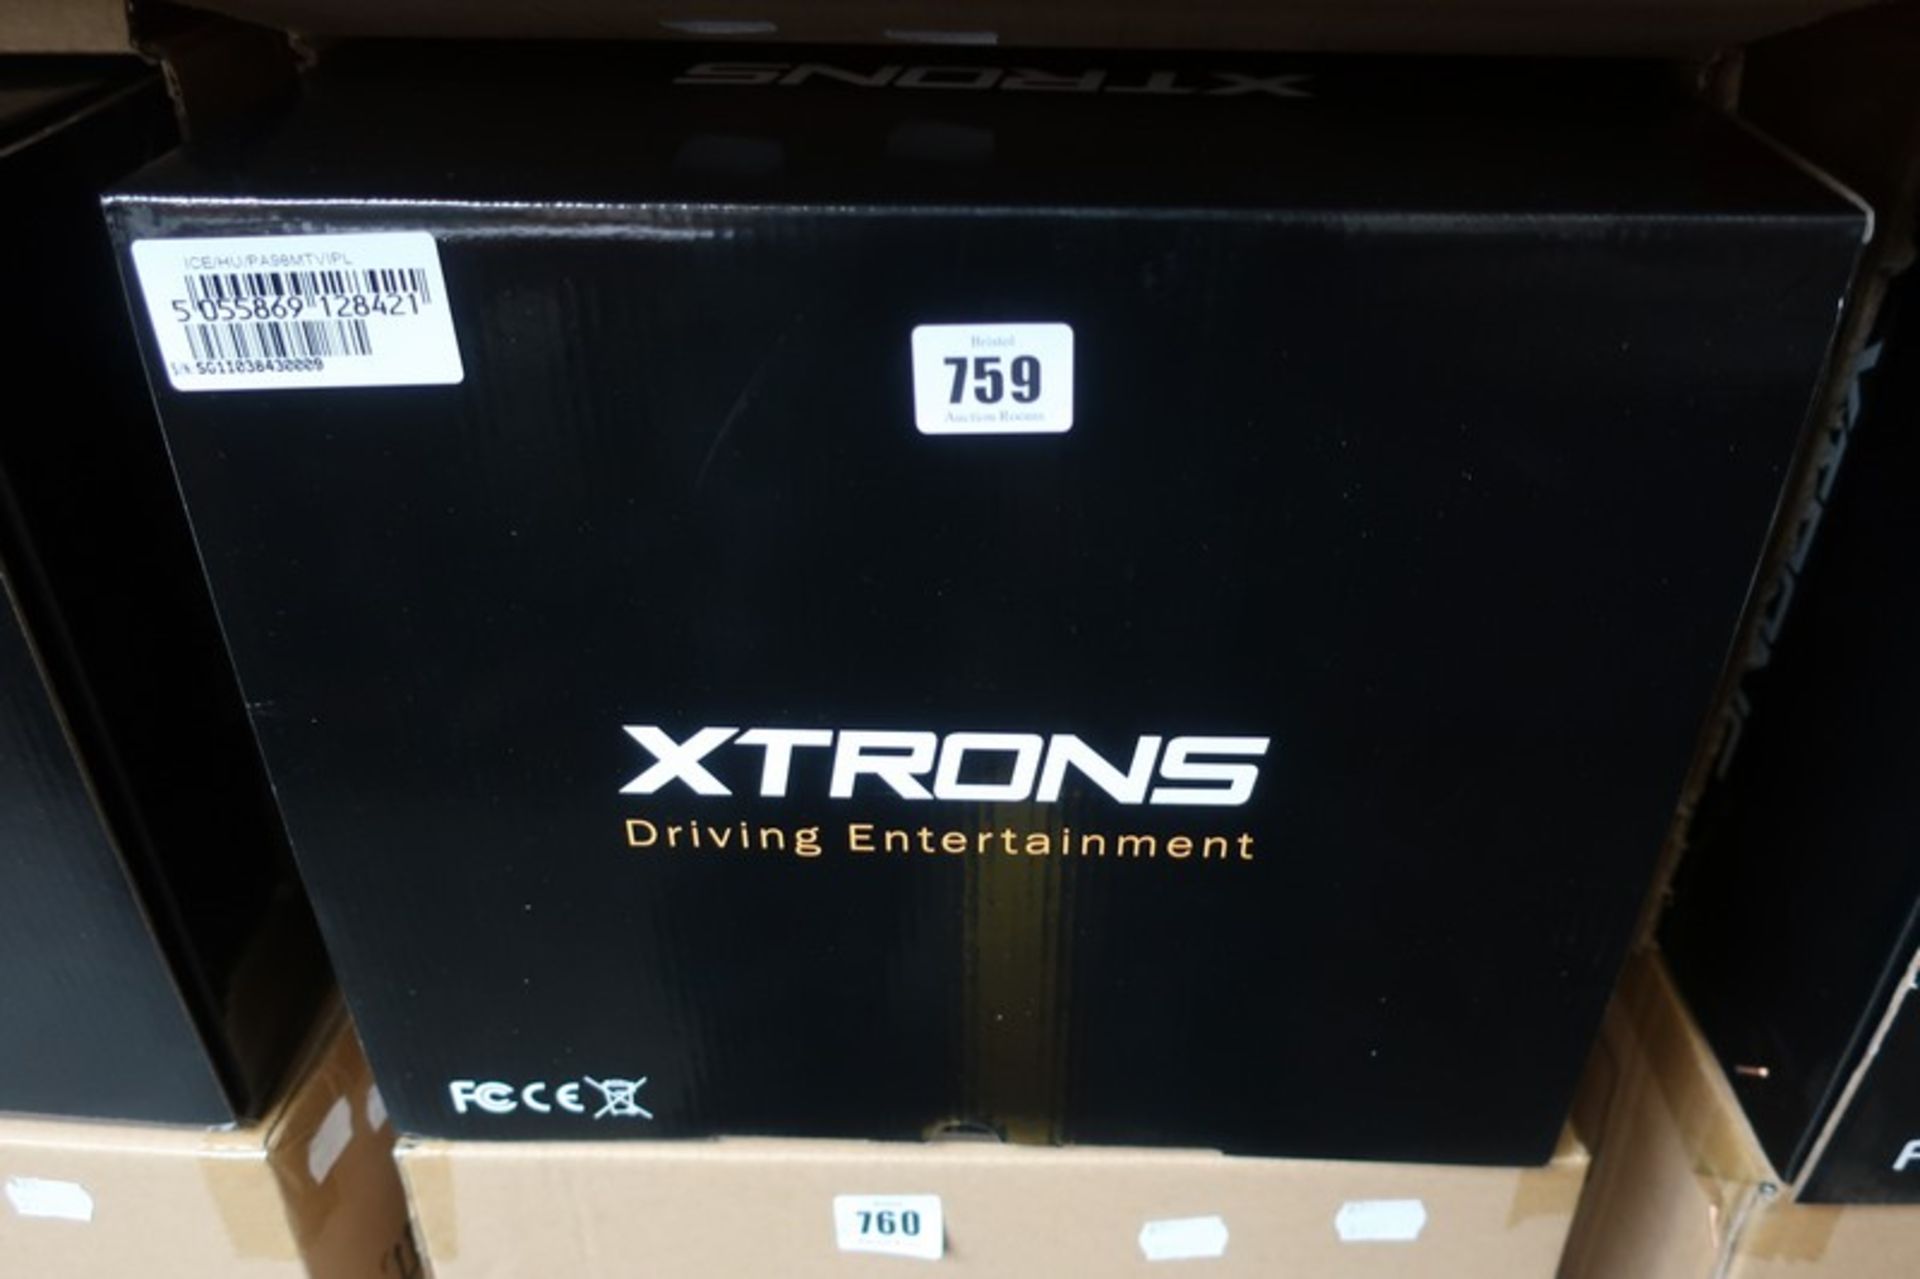 A boxed as new Xtrons ICE/HU/PA98MTVIPL 9" Android 8.1 Quad Core 16GB ROM + 2G RAM car stereo